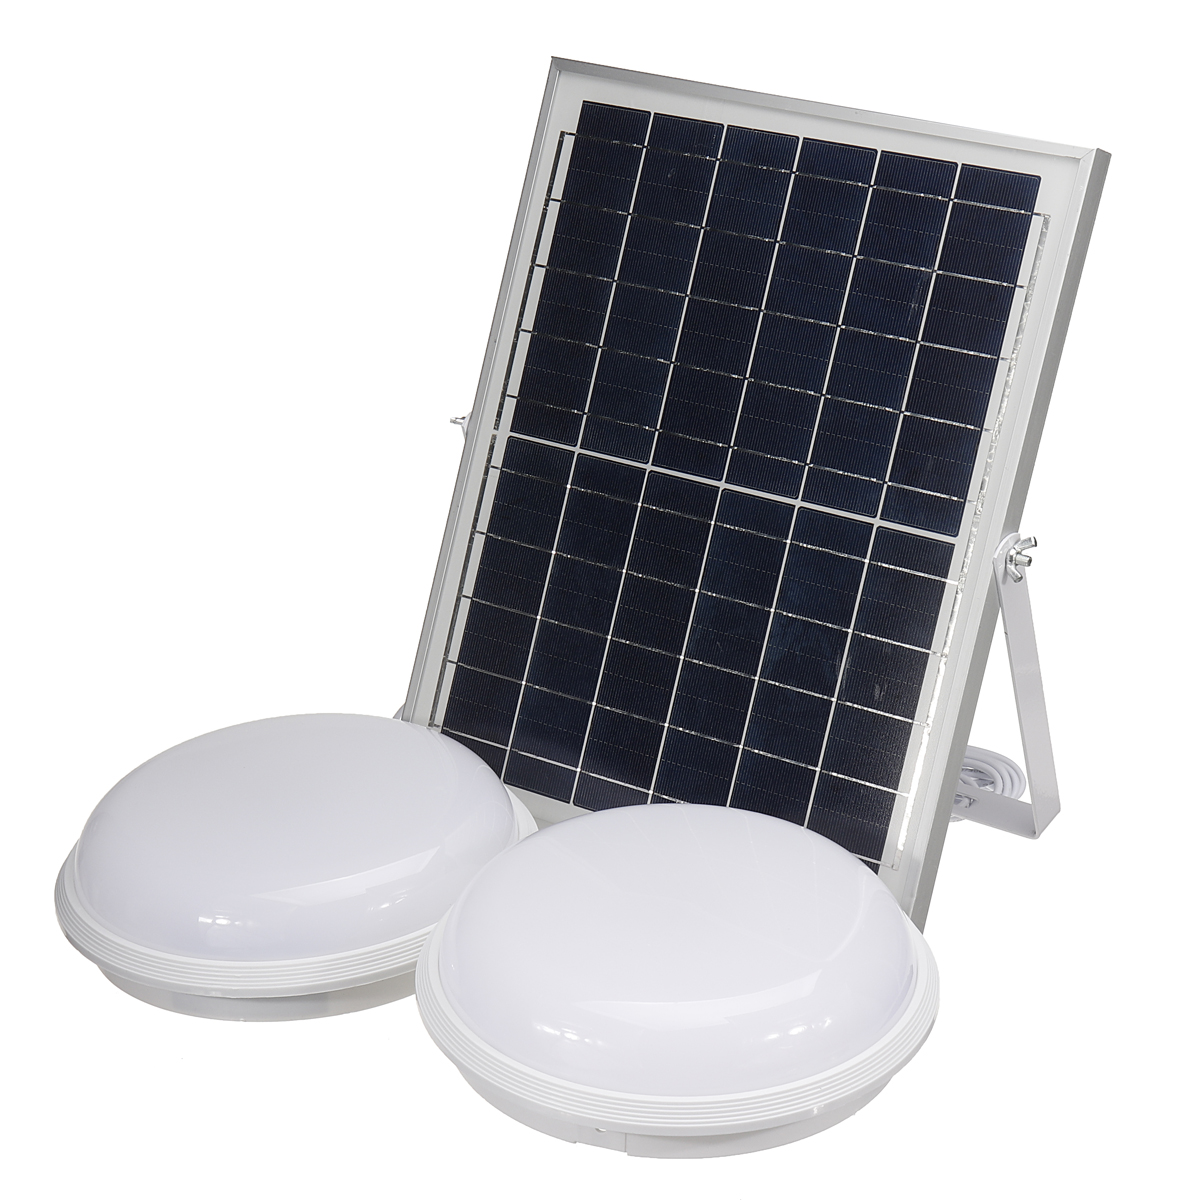 2-PCS-50W-Solar-Ceiling-Light-Remote-Control--Light-ControlTiming-Indoor-Solar-Light-100-Lamp-Beads--1935916-4